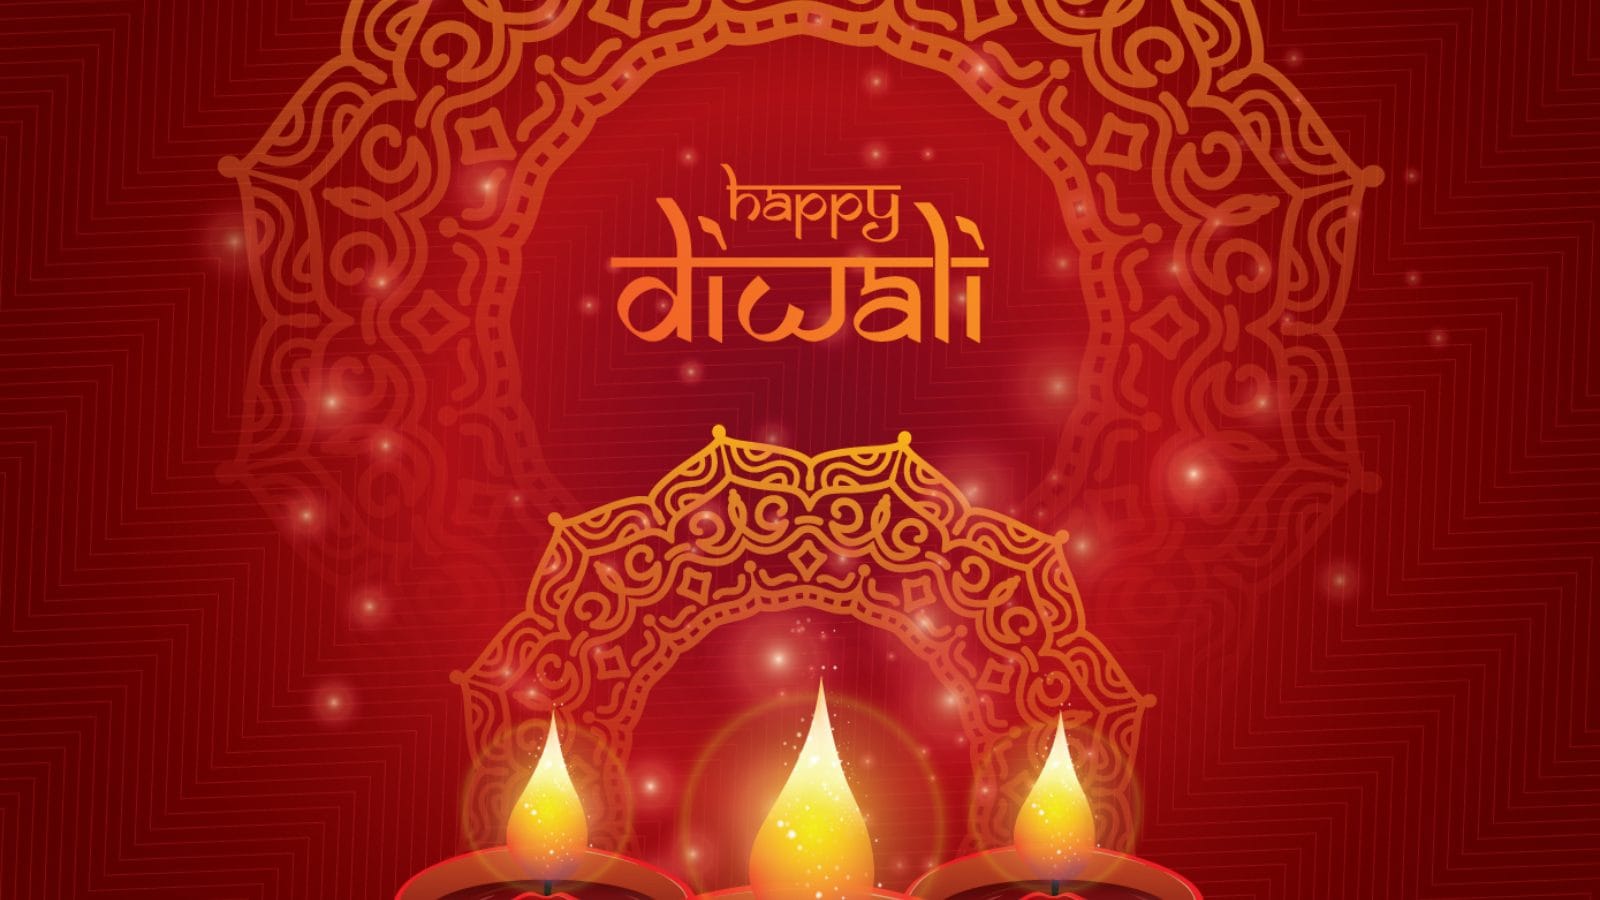 Happy Diwali Wallpapers HD - Apps on Google Play